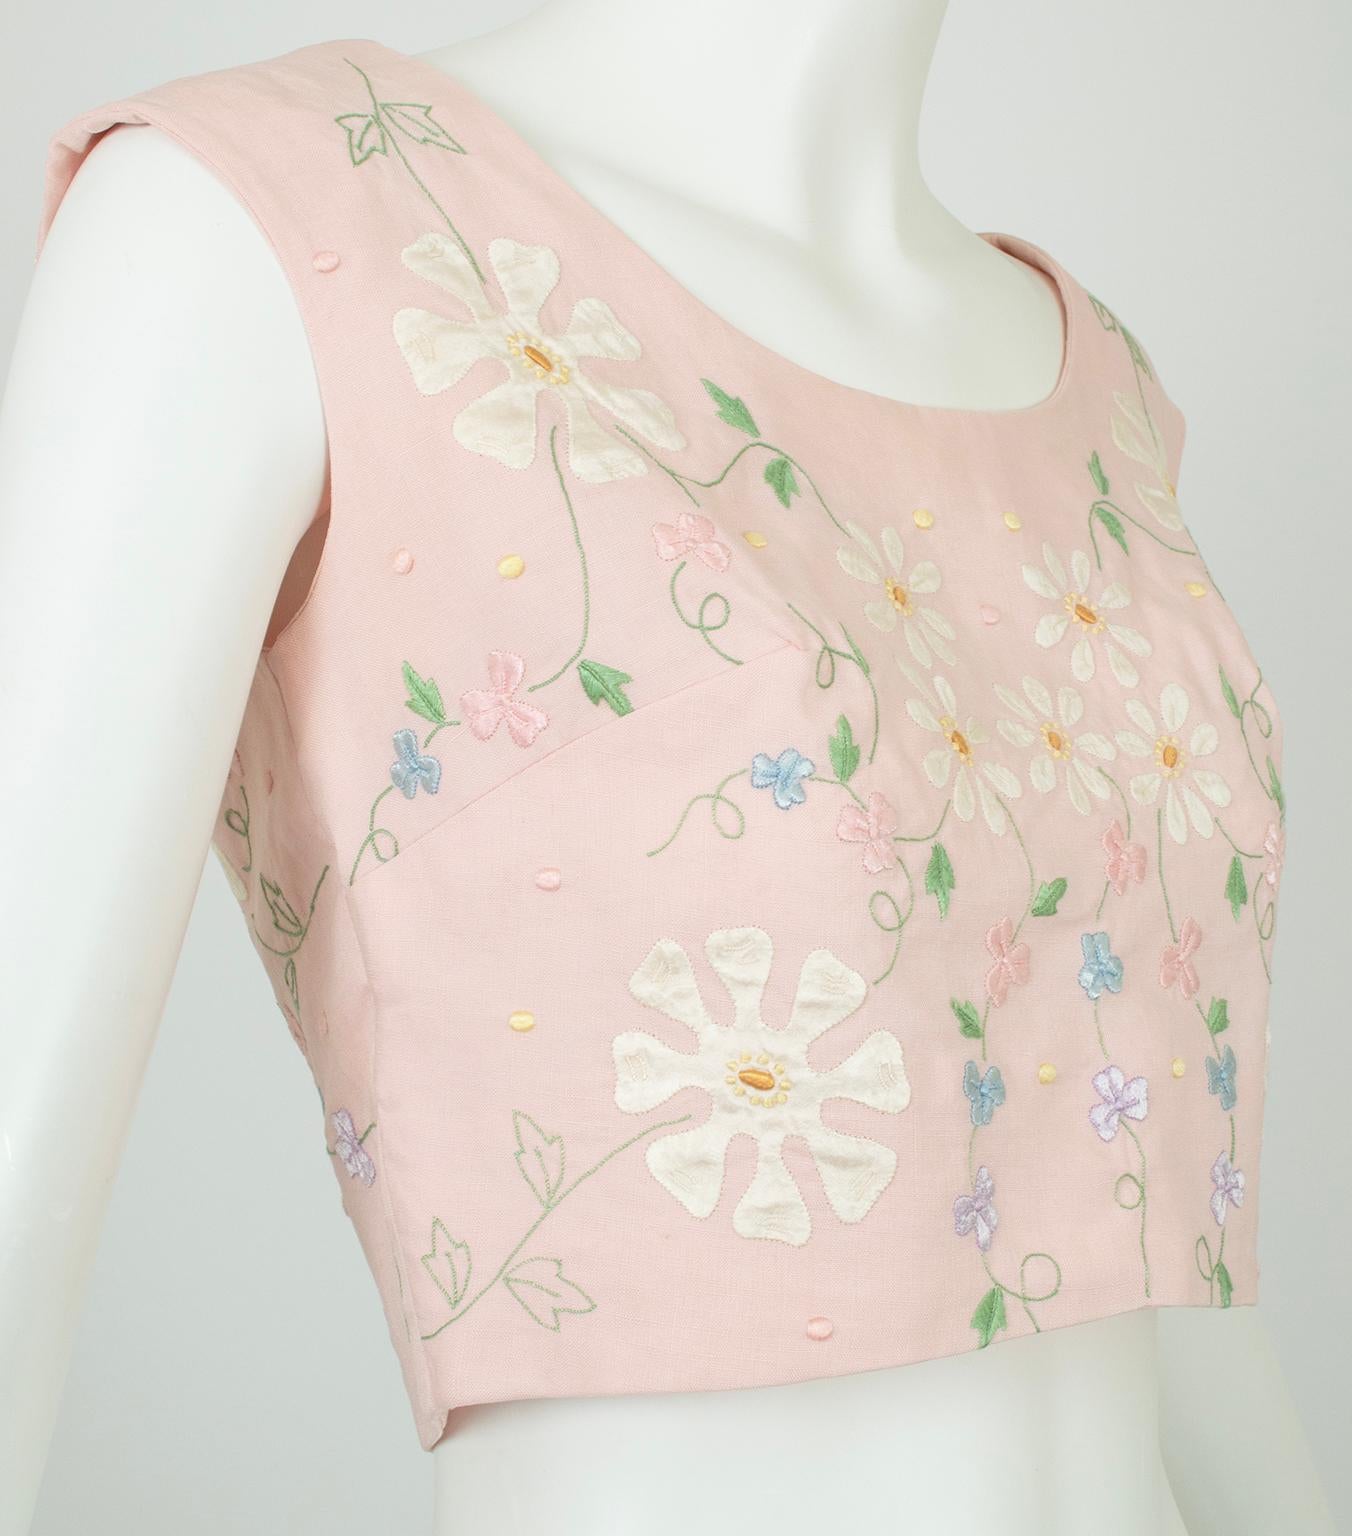 A feminine piece of heaven, this ultra-cropped linen top is bursting with ladylike details such as silk appliqué flowers, embroidered vines and pastel dots. Perfect for a summer on the Riviera from Tucson’s once-famed “Paris on the Desert,” the